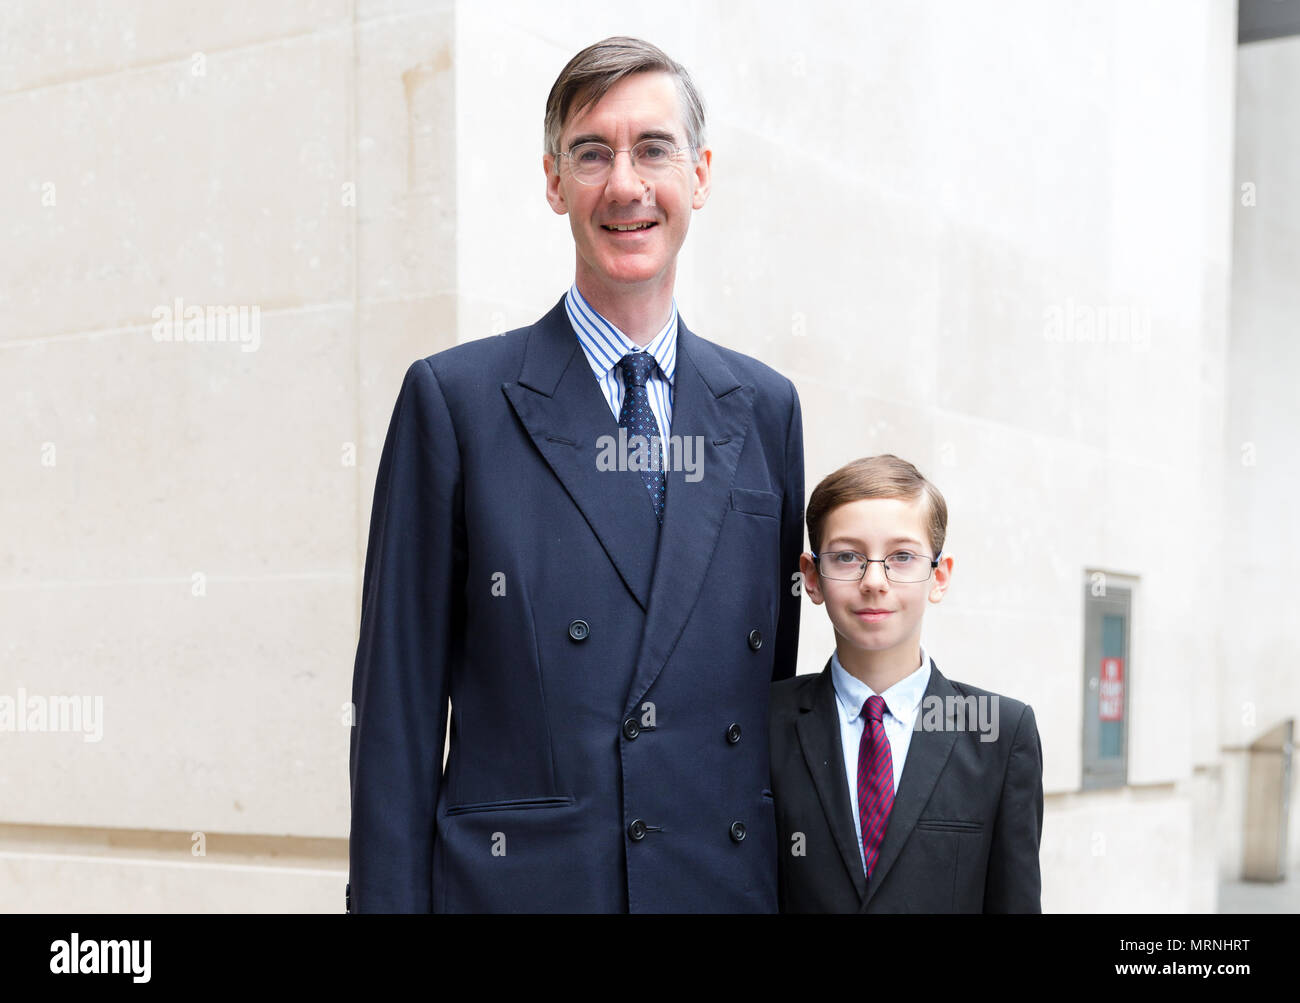 London, UK. 27th May 2018. Jacob Rees-Mogg MP outside the BBC studios after appearing on 'The Andrew Marr Show' with his eldest son, Peter Theodore Alphege, aged 9 years old. Credit: TPNews/Alamy Live News Stock Photo